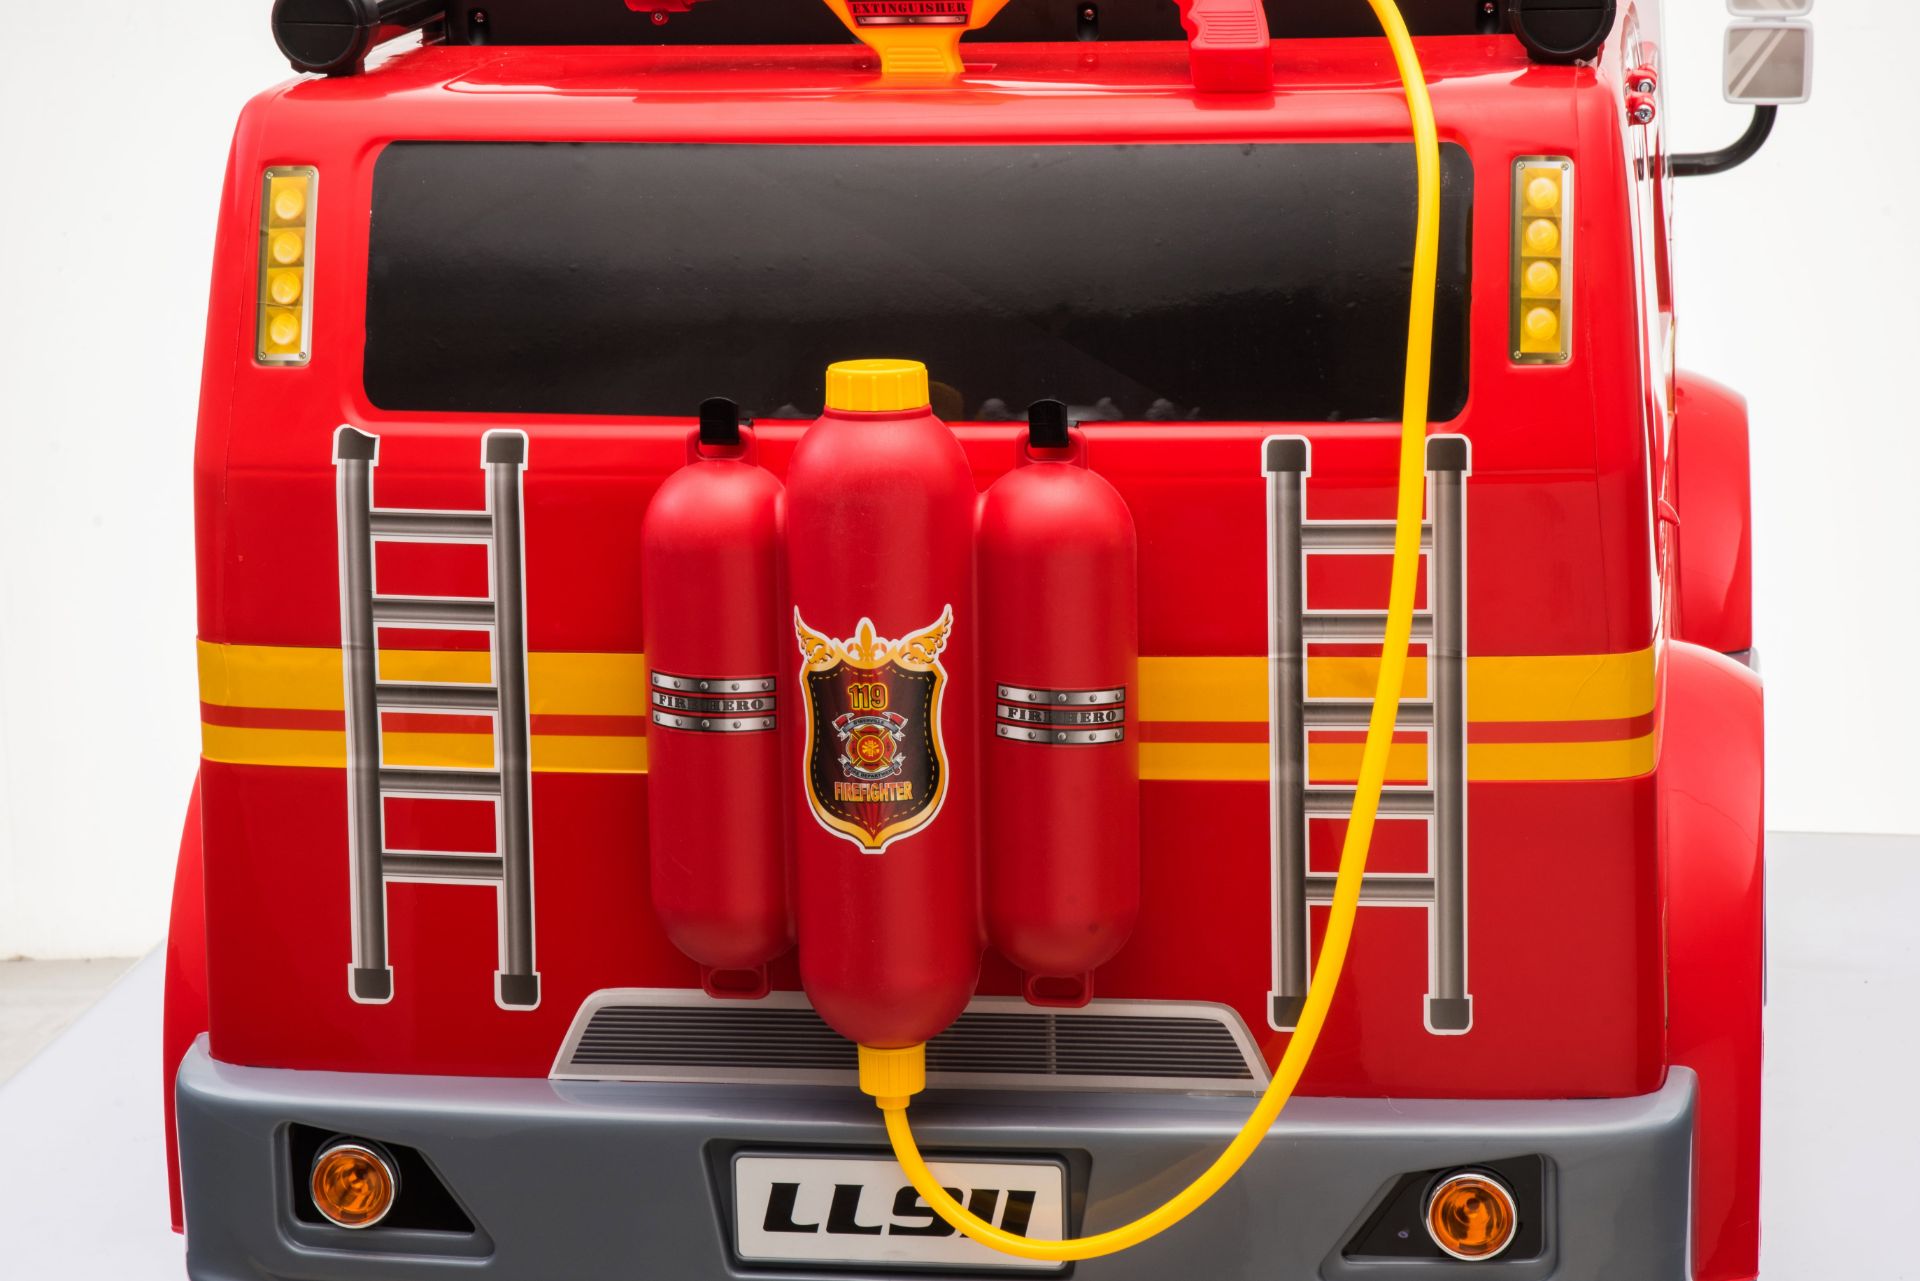 Ride On Fire Truck 911 12v EVA Wheels Twin Leather Seats and Parental Remote Control - Image 12 of 21